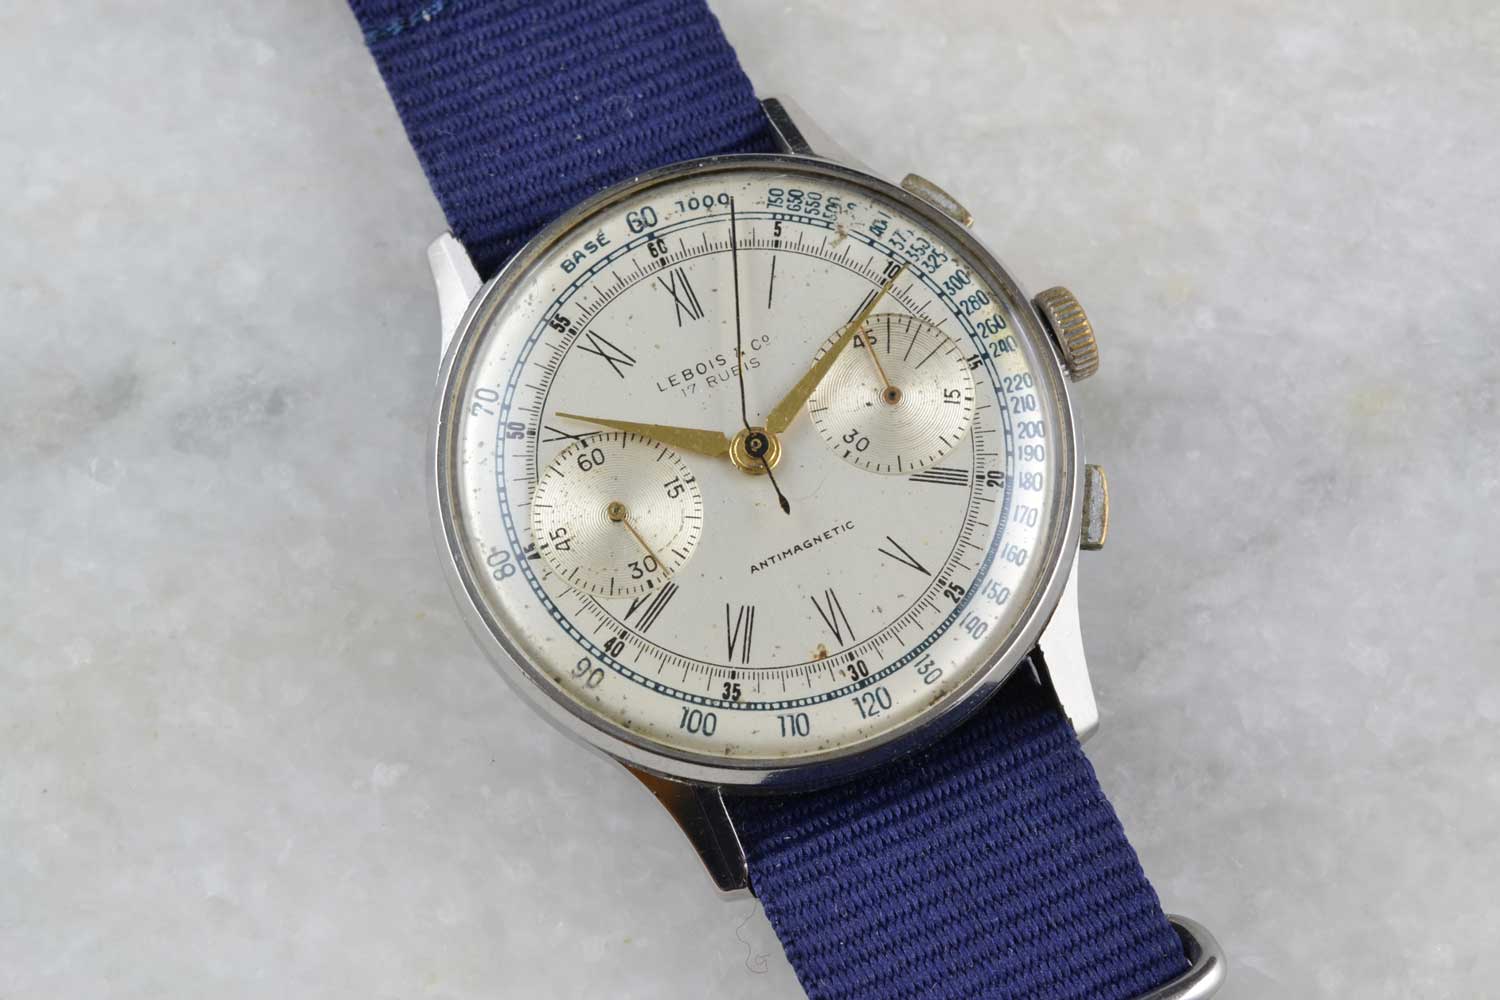 Lebois and Co 1940s Chronograph Antimagnetic